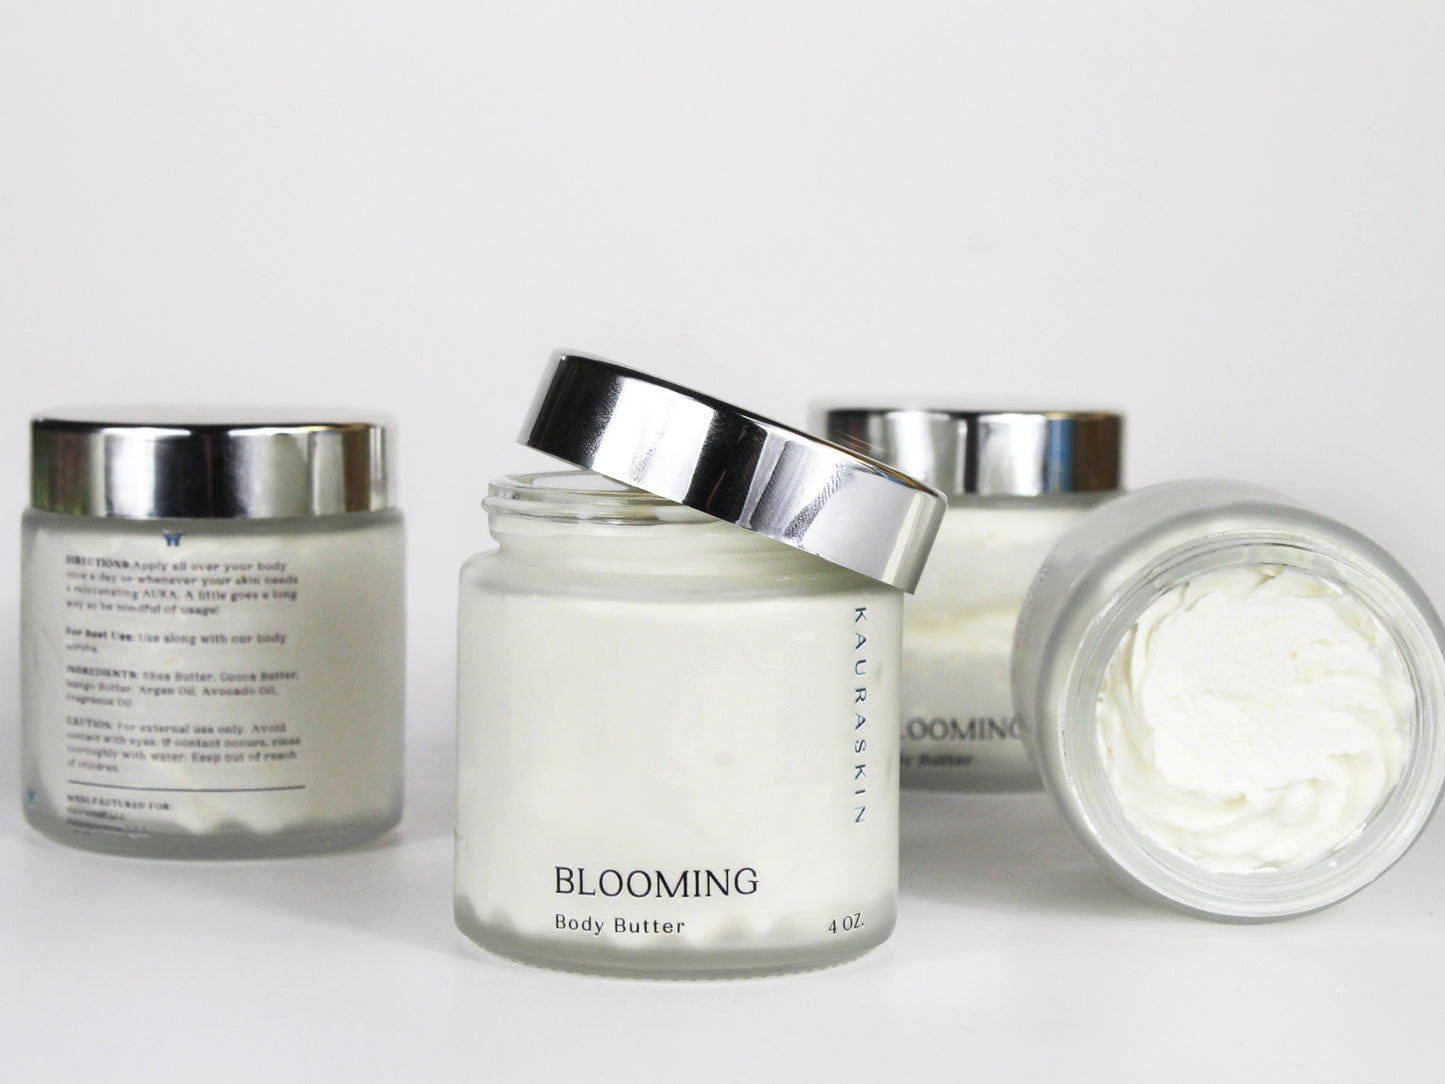 Blooming Body Butter